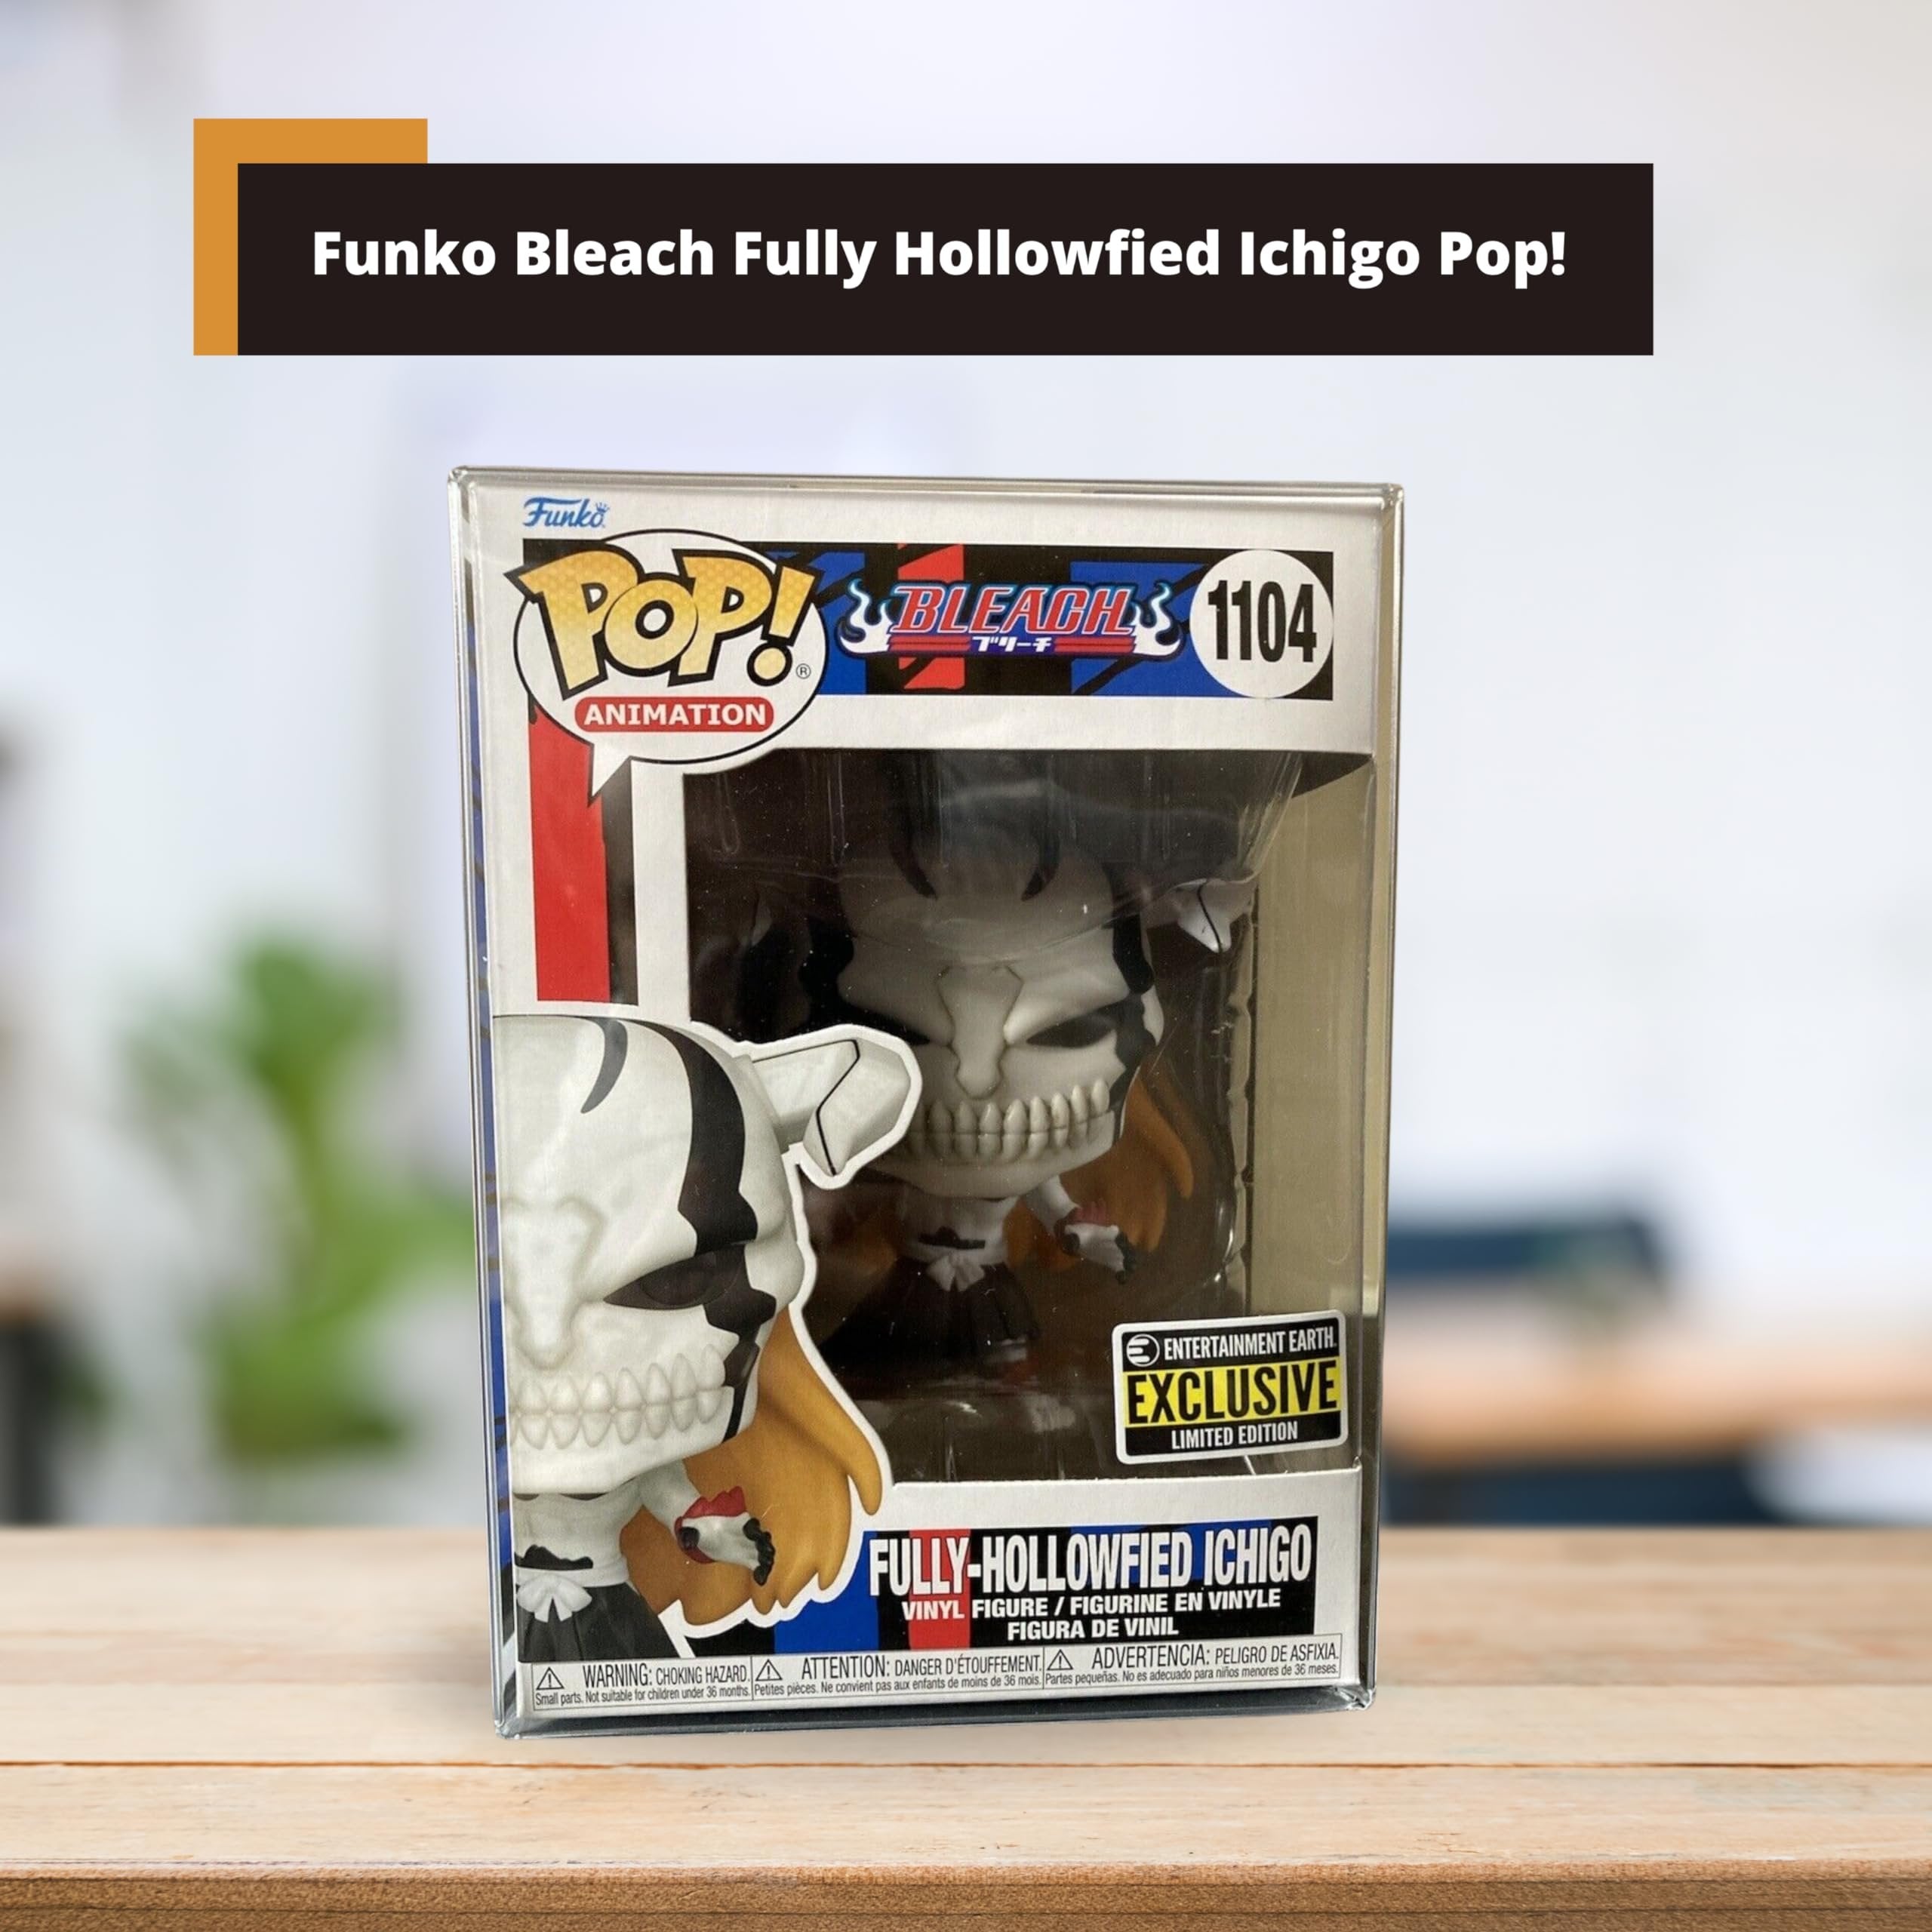 Worldwide Nutrition Bundle: Funko Bleach - Fully-Hollowfied Ichigo Lorde Vasto Form Vinyl Figure Multicolored, 3.75 inches with Compatible Box Protector Case and Multi-Purpose Key Chain